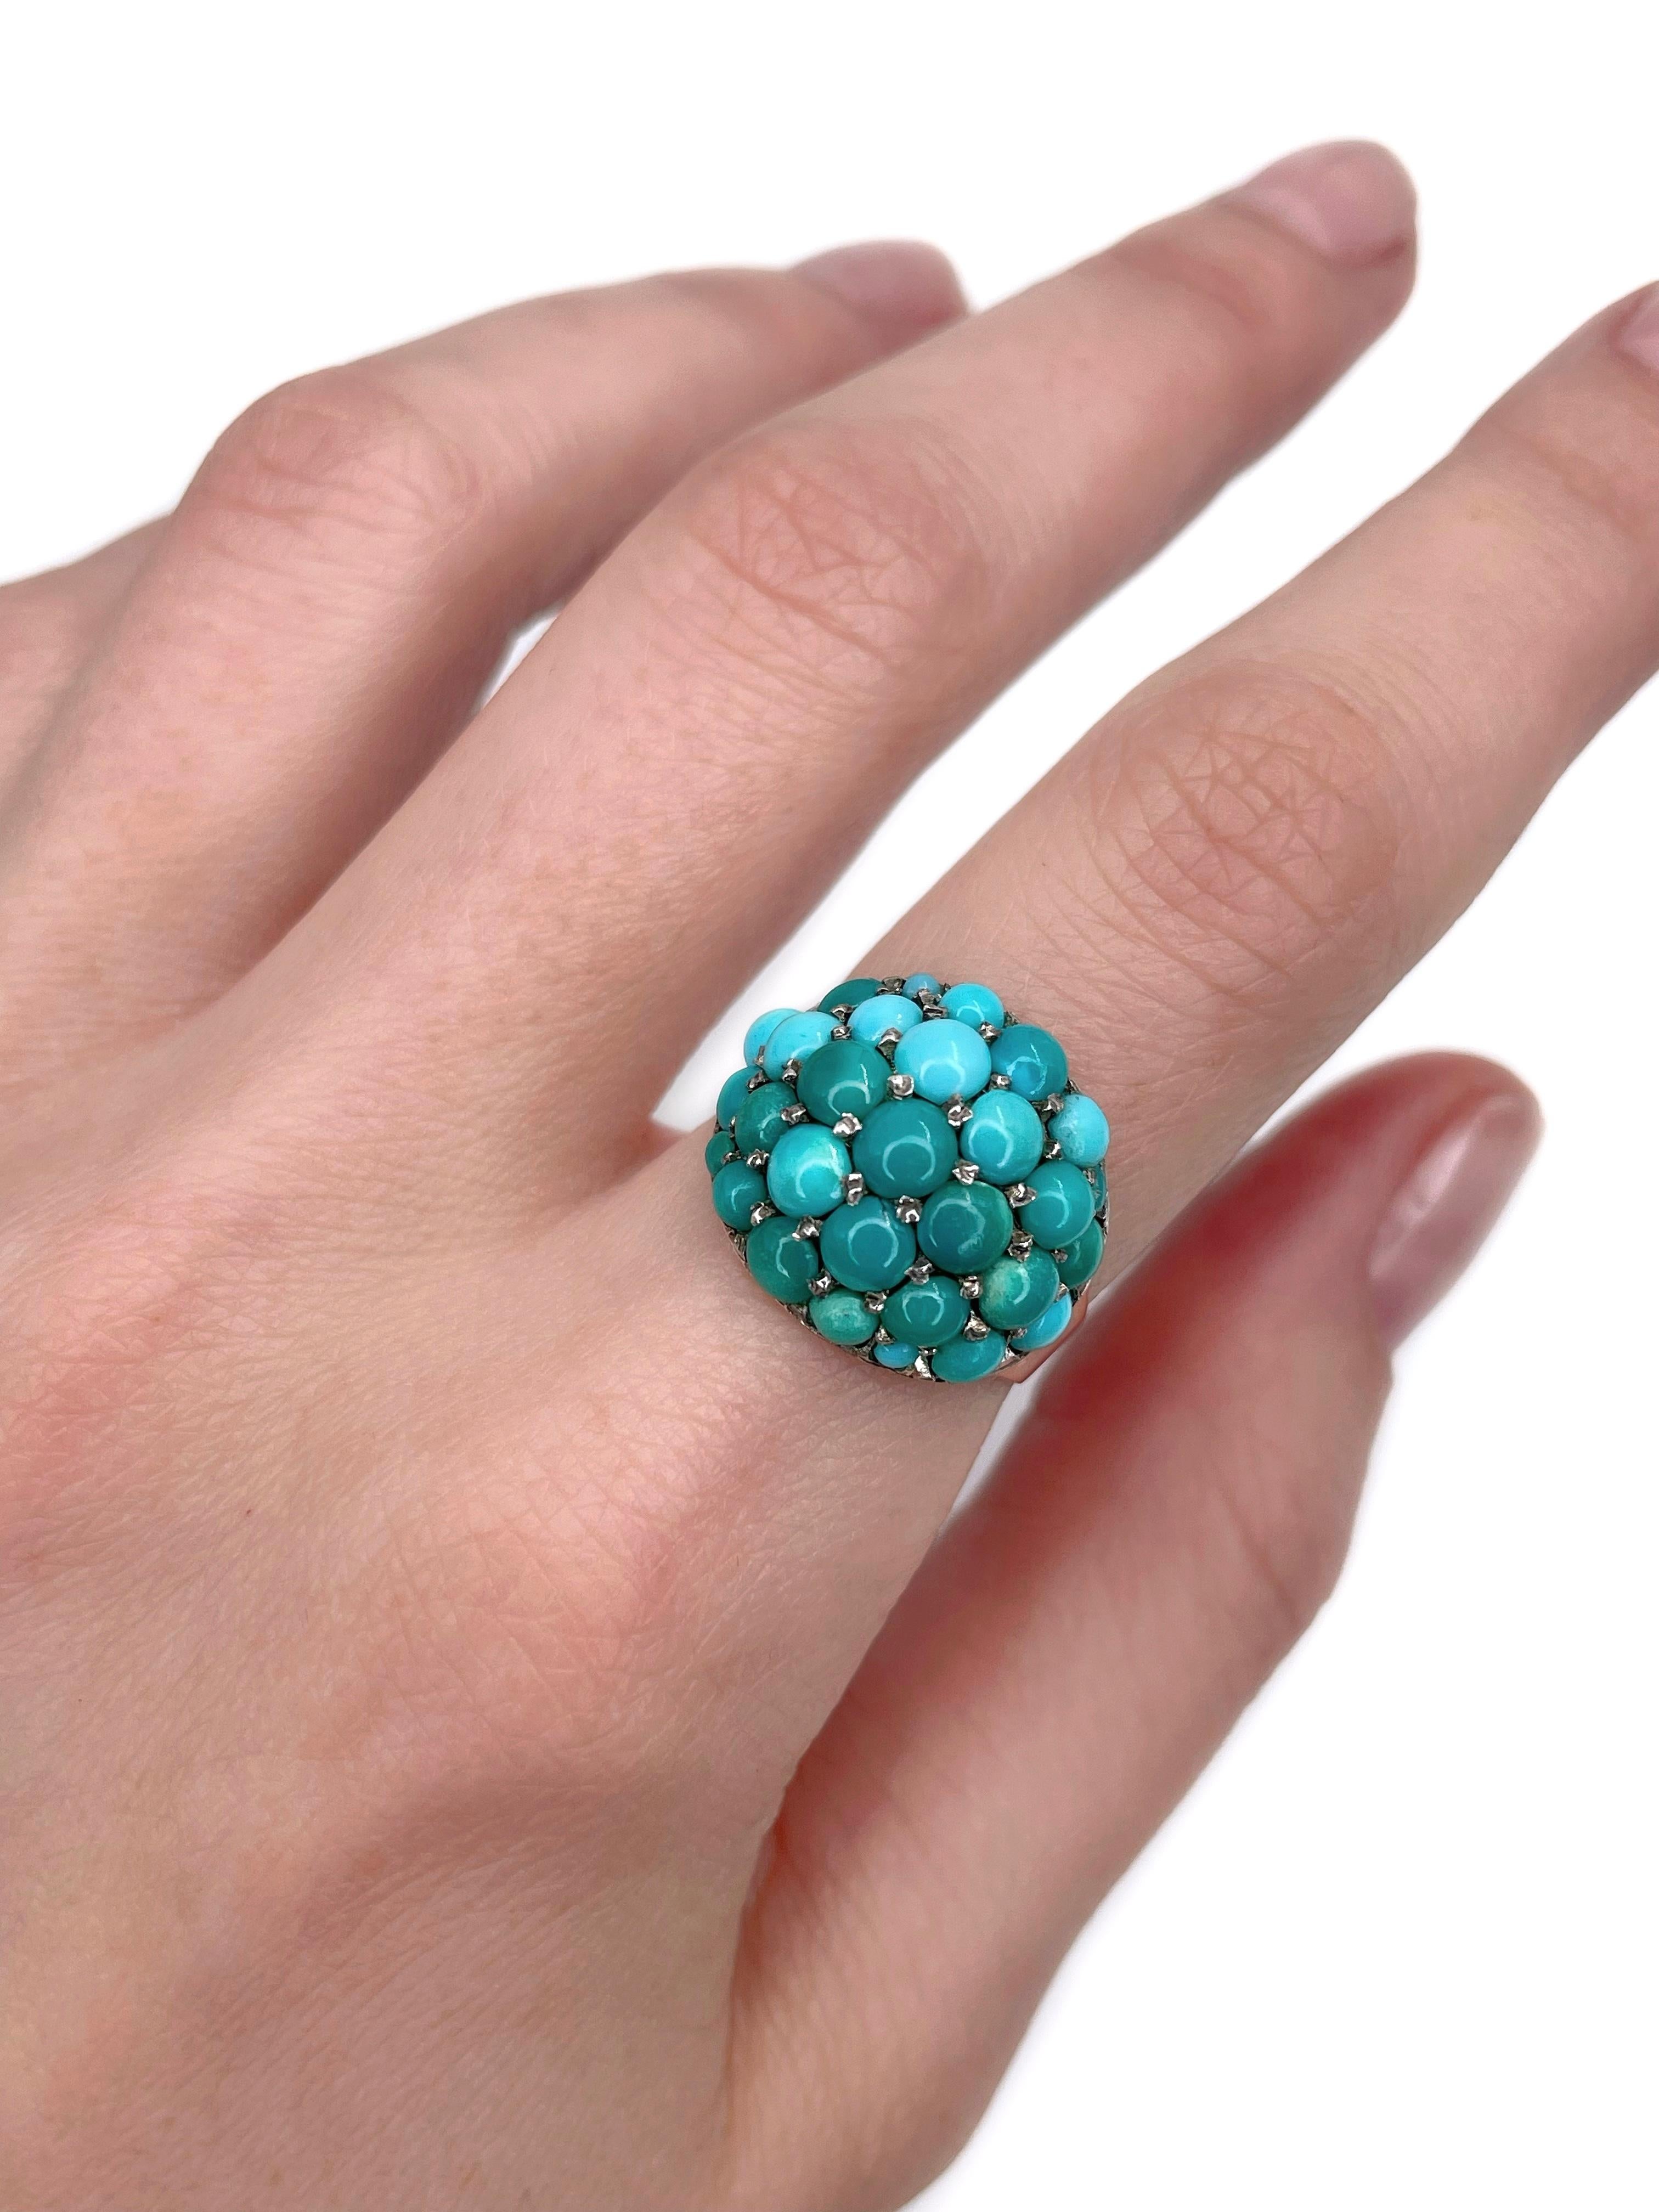 This is a Victorian dome ring crafted in 14K gold. Circa 1890.

The piece features pavé set cabochon cut turquoise of different shades.

Signed “14K” on the shank.

Weight: 5.31g
Size: 17.5 (US 7)

———

If you have any questions, please feel free to